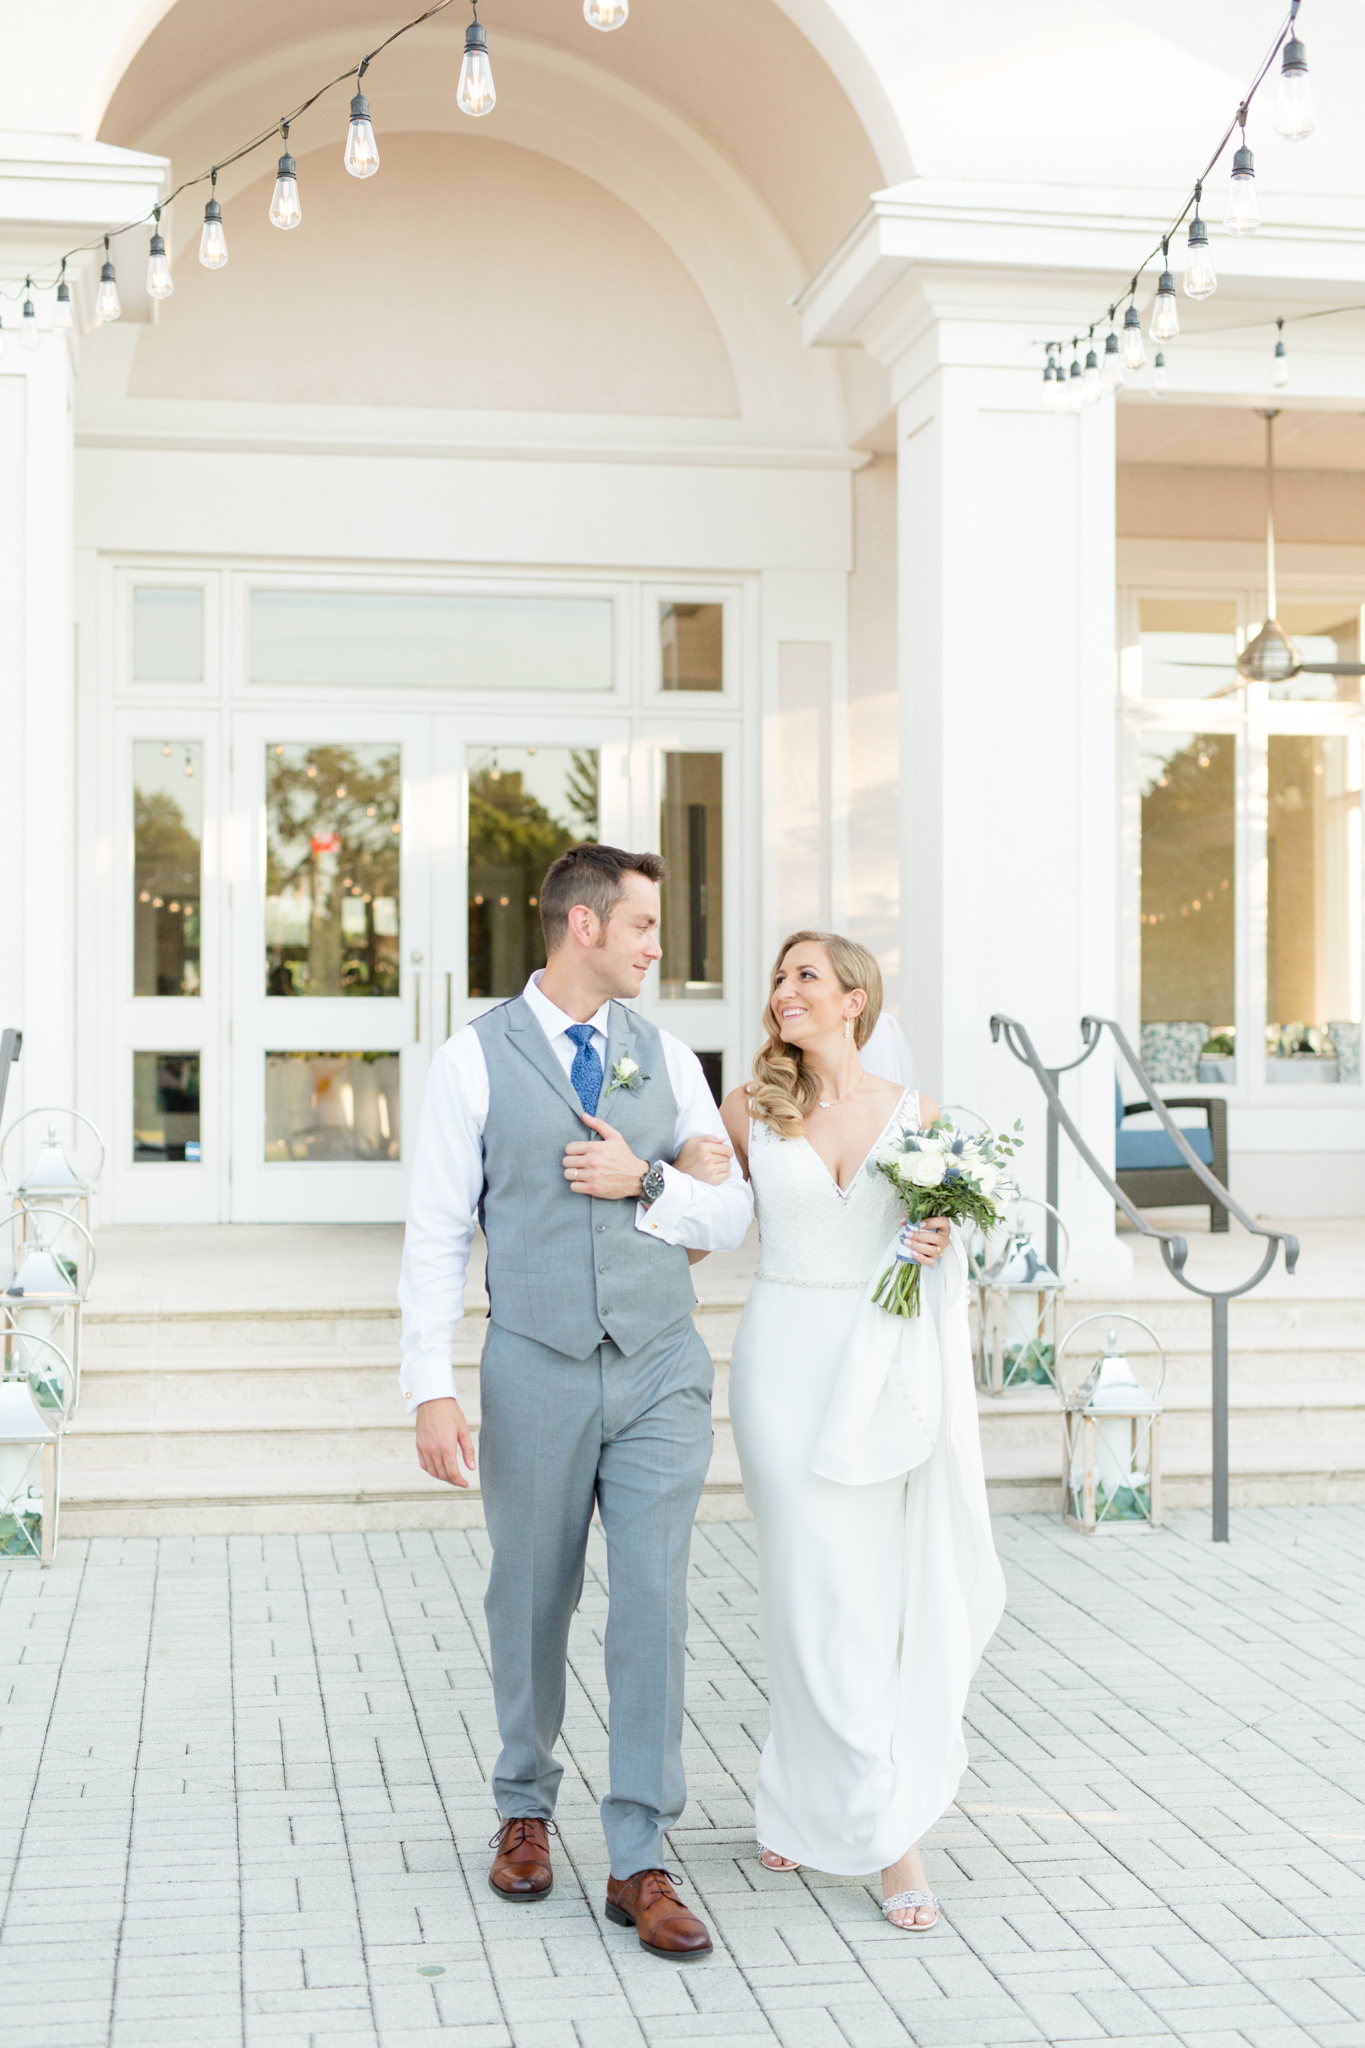 Bride and groom walk together at Rosedale Gold and Country Club.